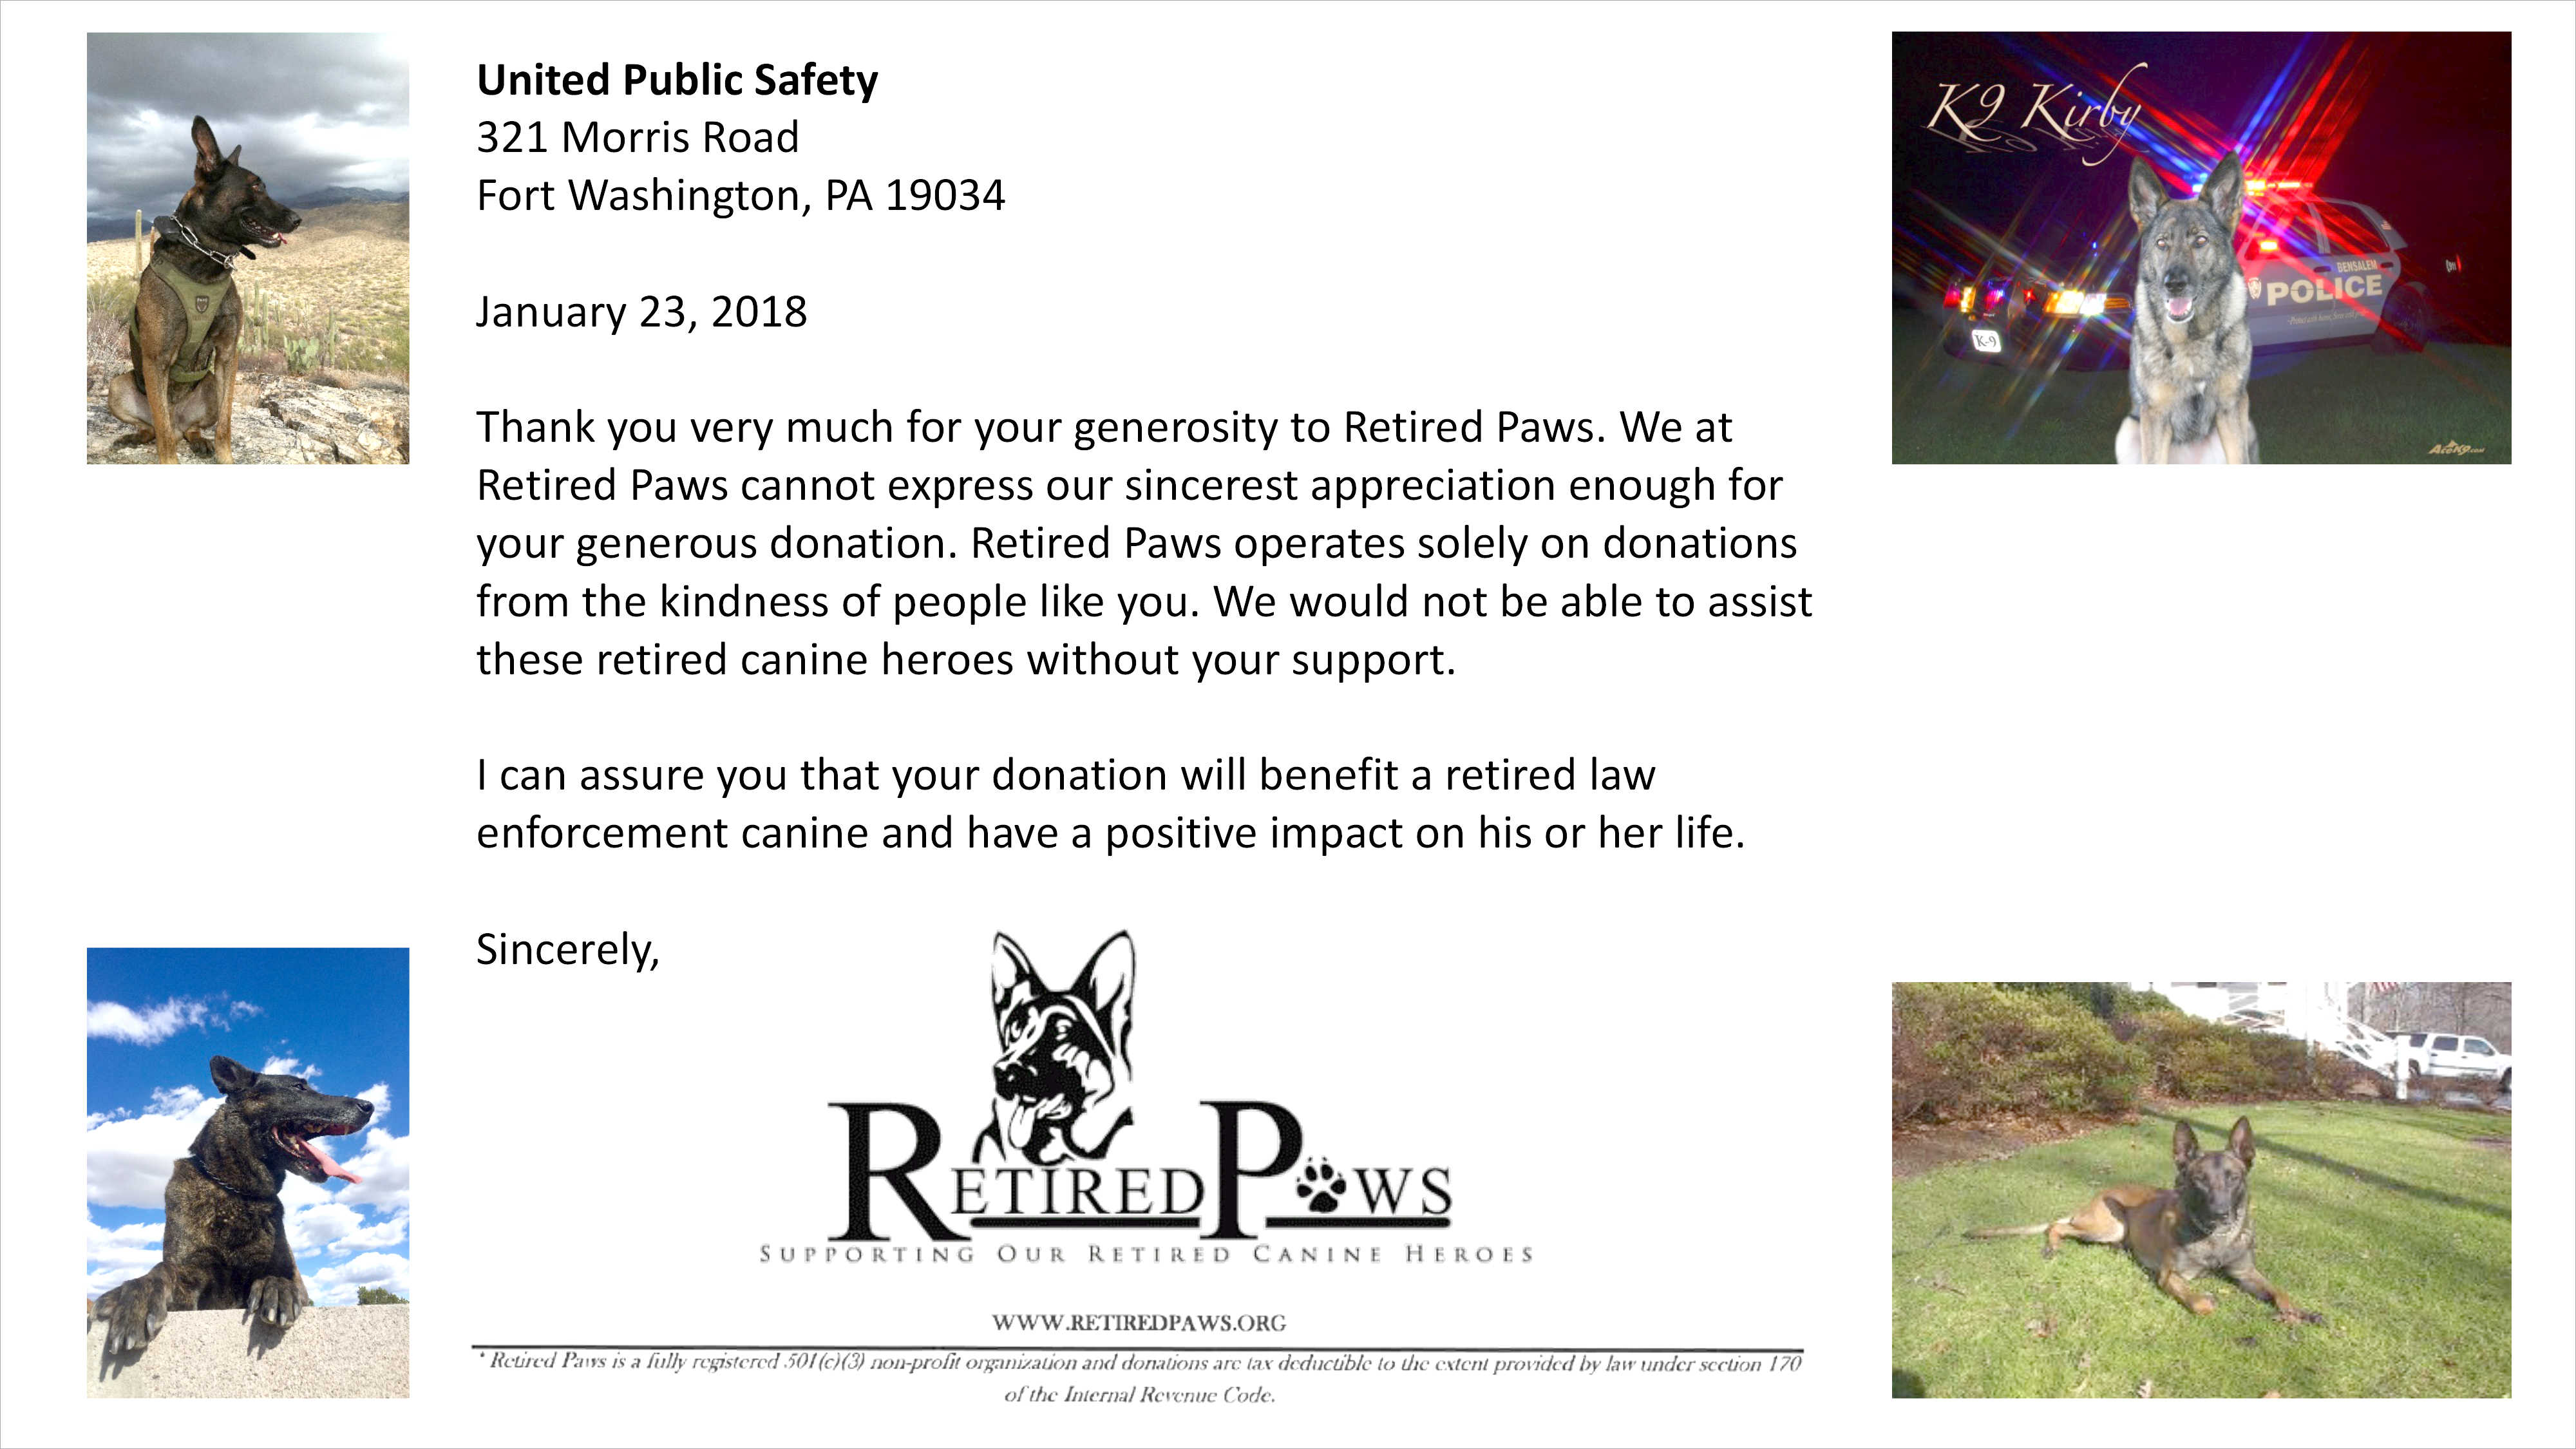 Thank you letter from Retired Paws